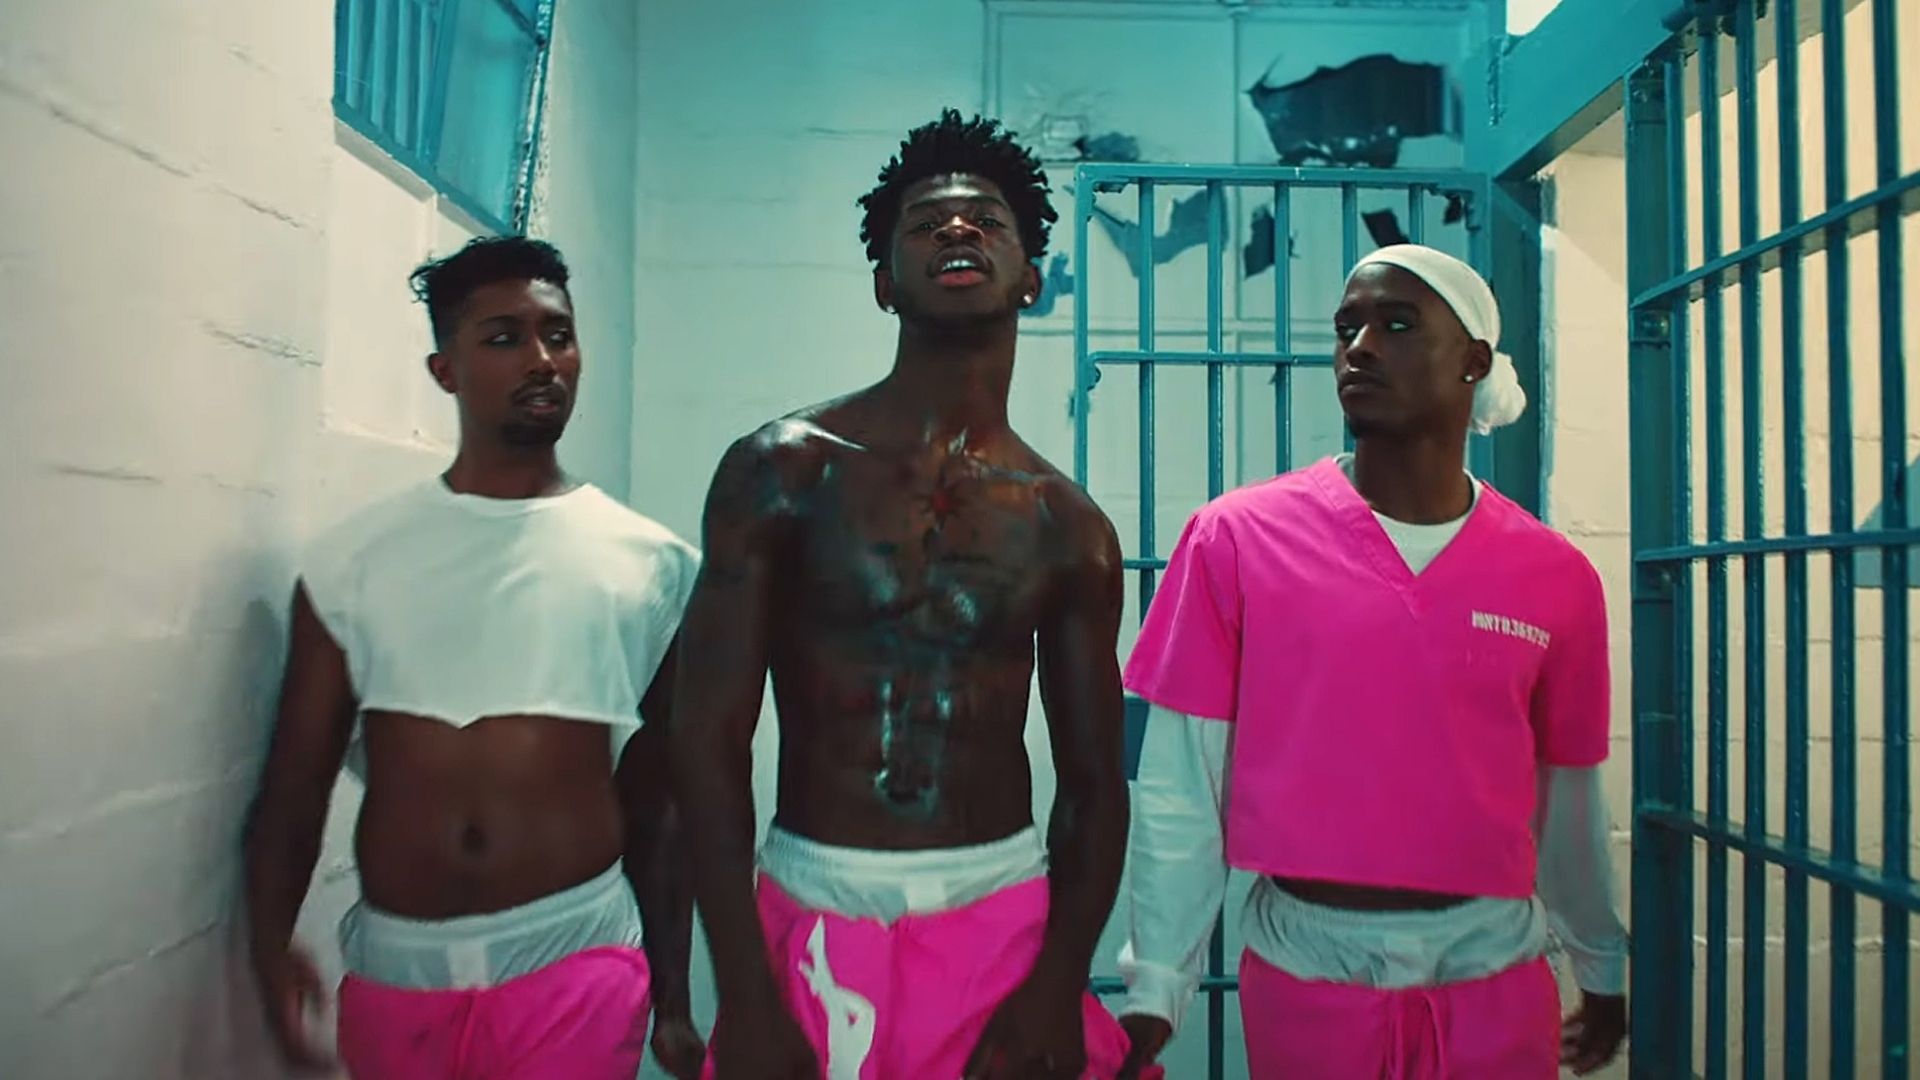 In Industry Baby music video, Lil Nas X escapes prison queer popstar style